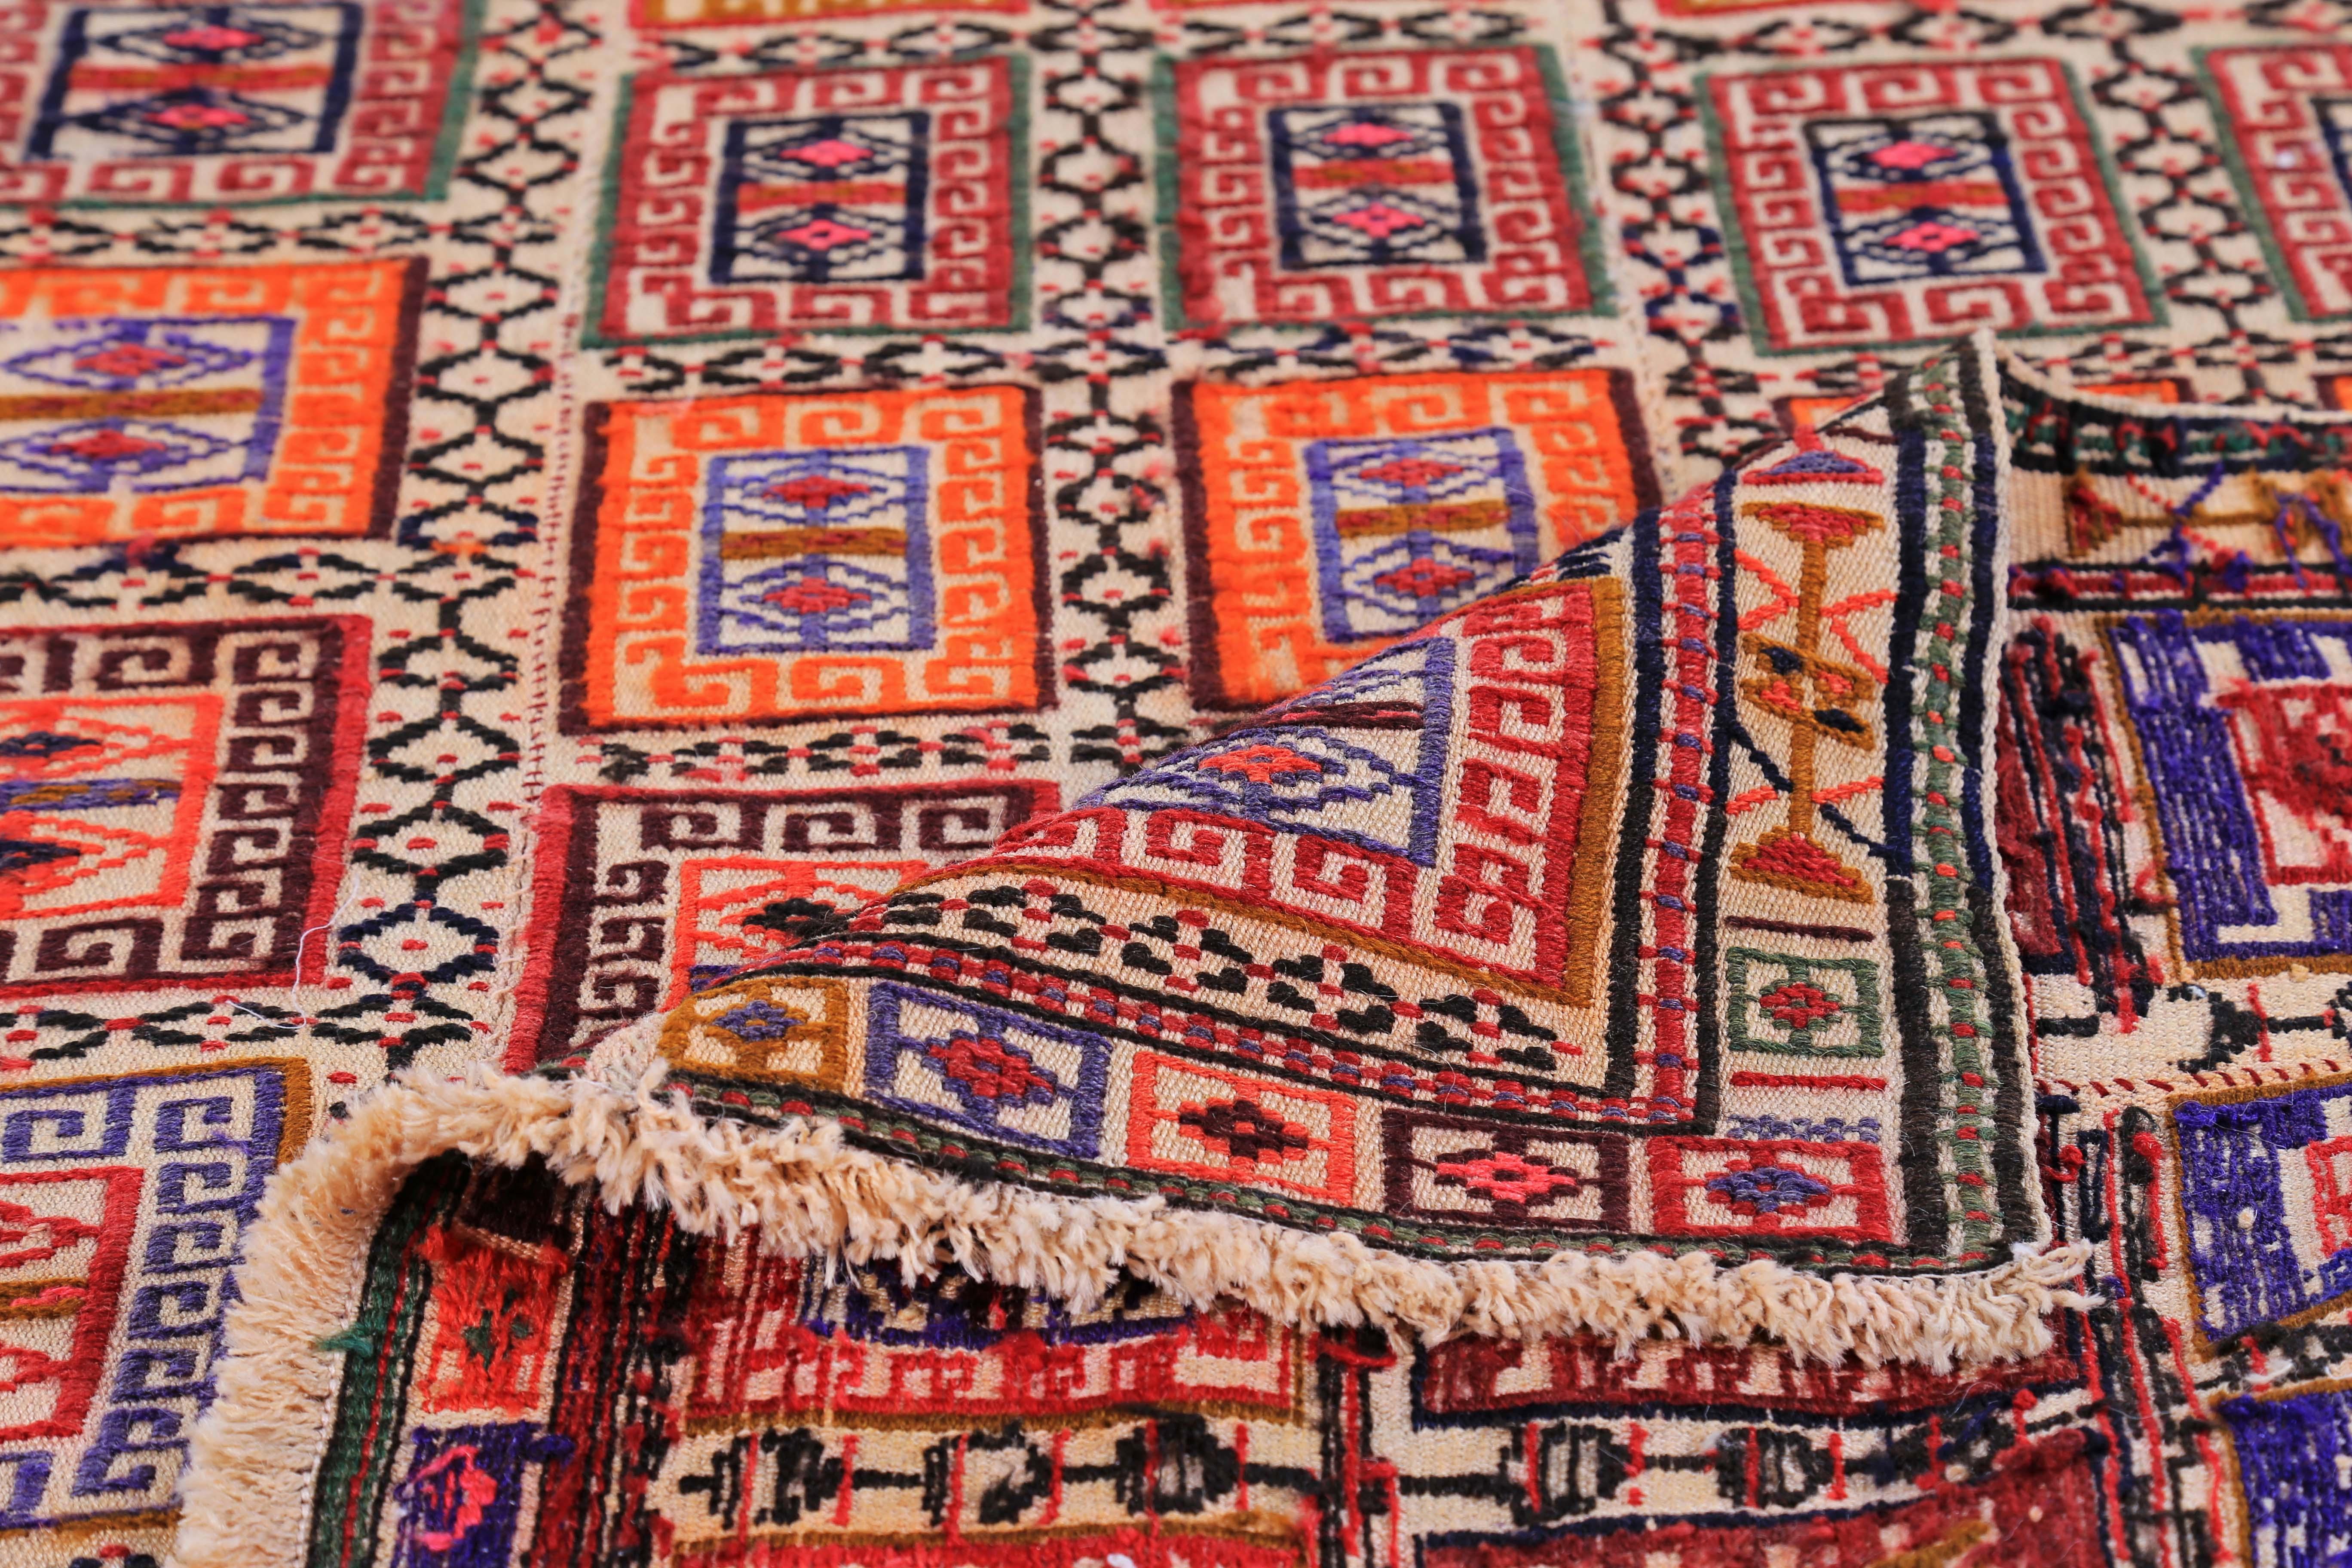 Hand-Woven Modern Turkish Kilim Rug with Red, Blue and Orange Tribal Blocks on Beige Field For Sale